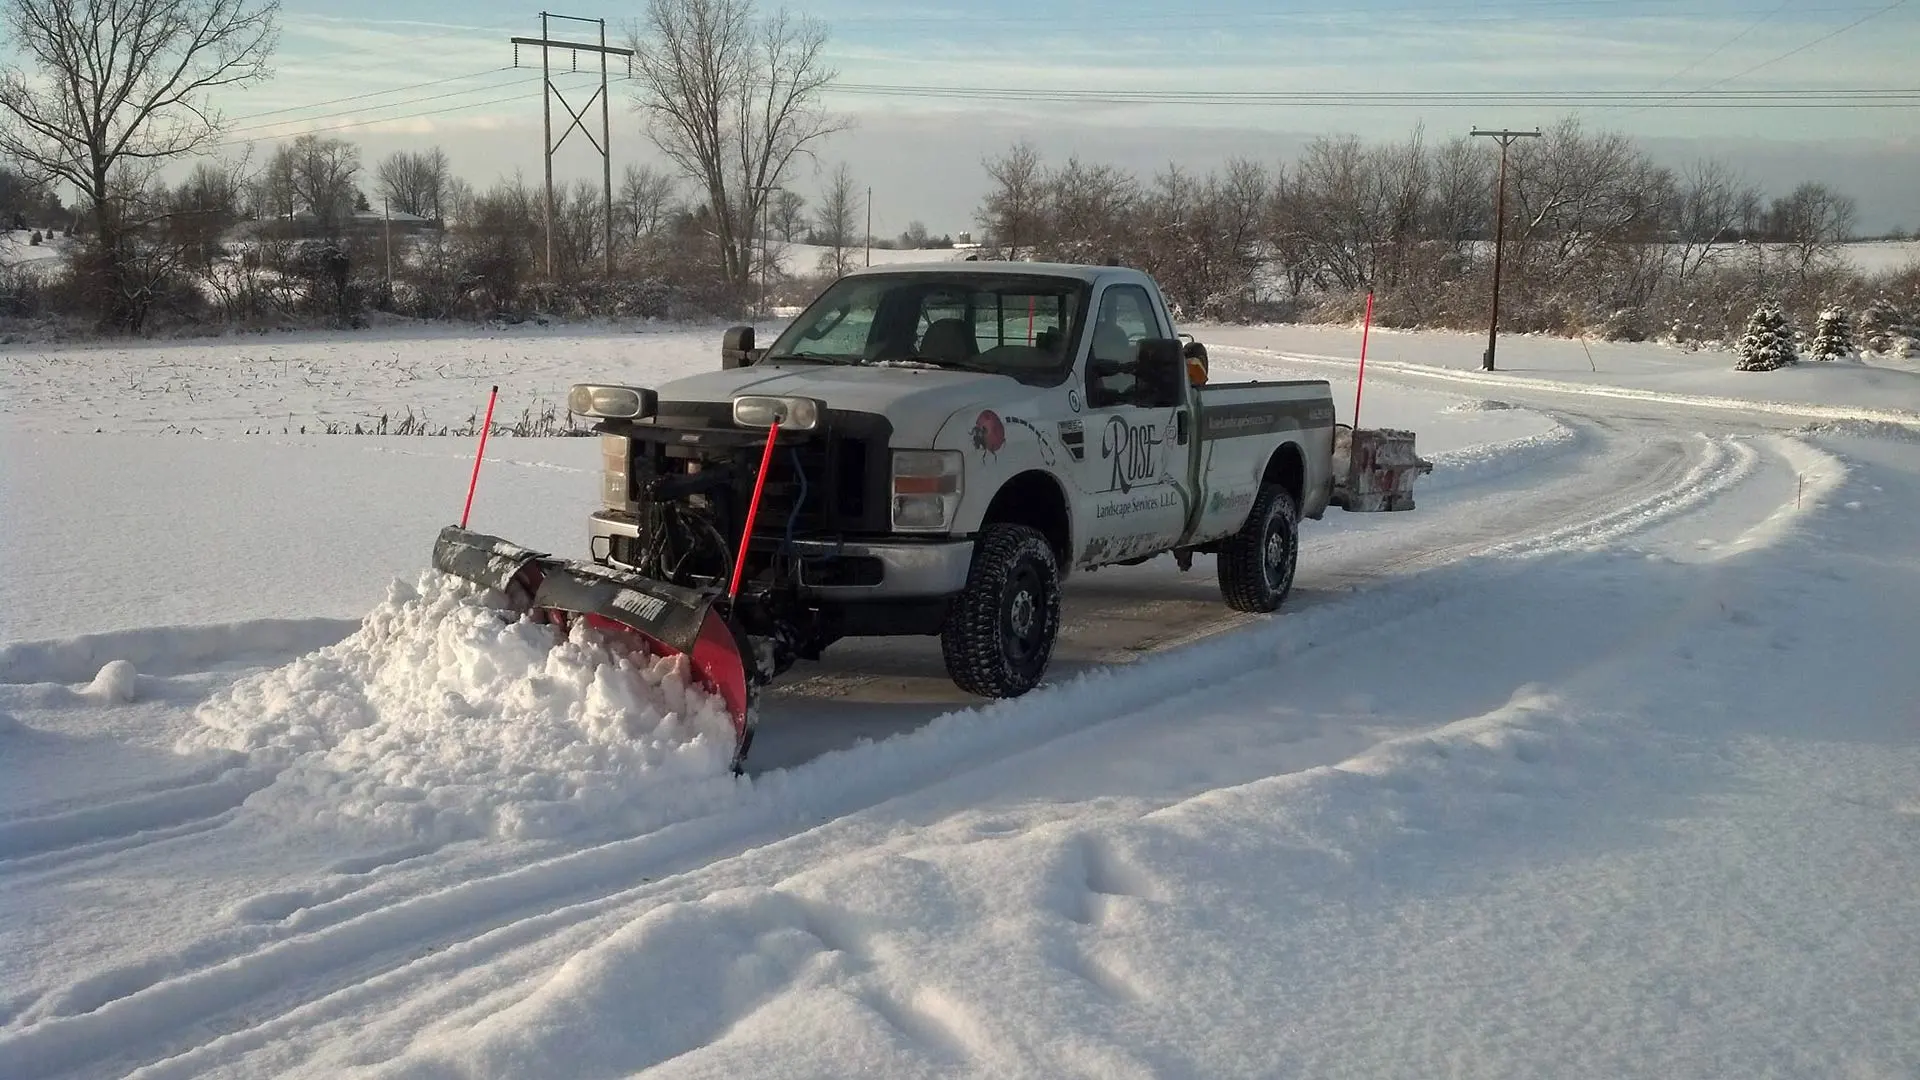 Rose Landscaping company truck plowing snow in Grand Rapids, MI.